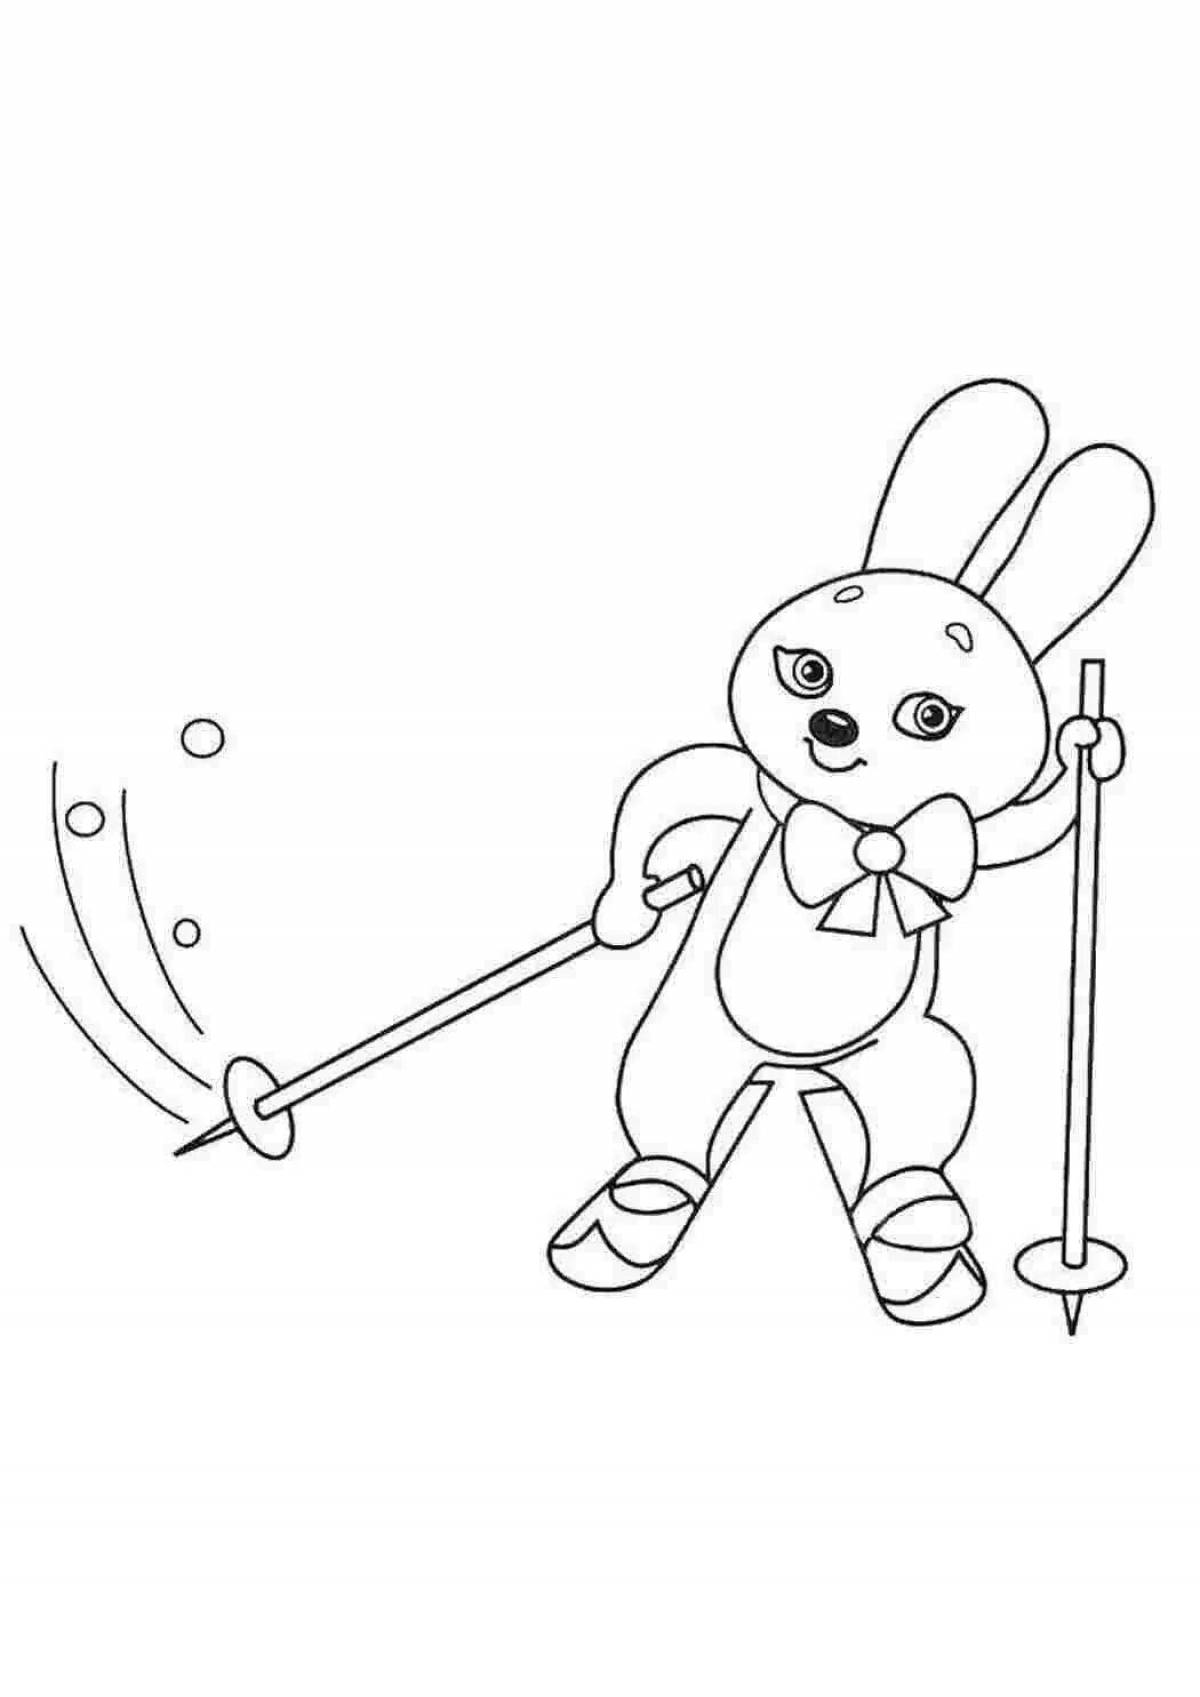 Shining Winter Olympics coloring page